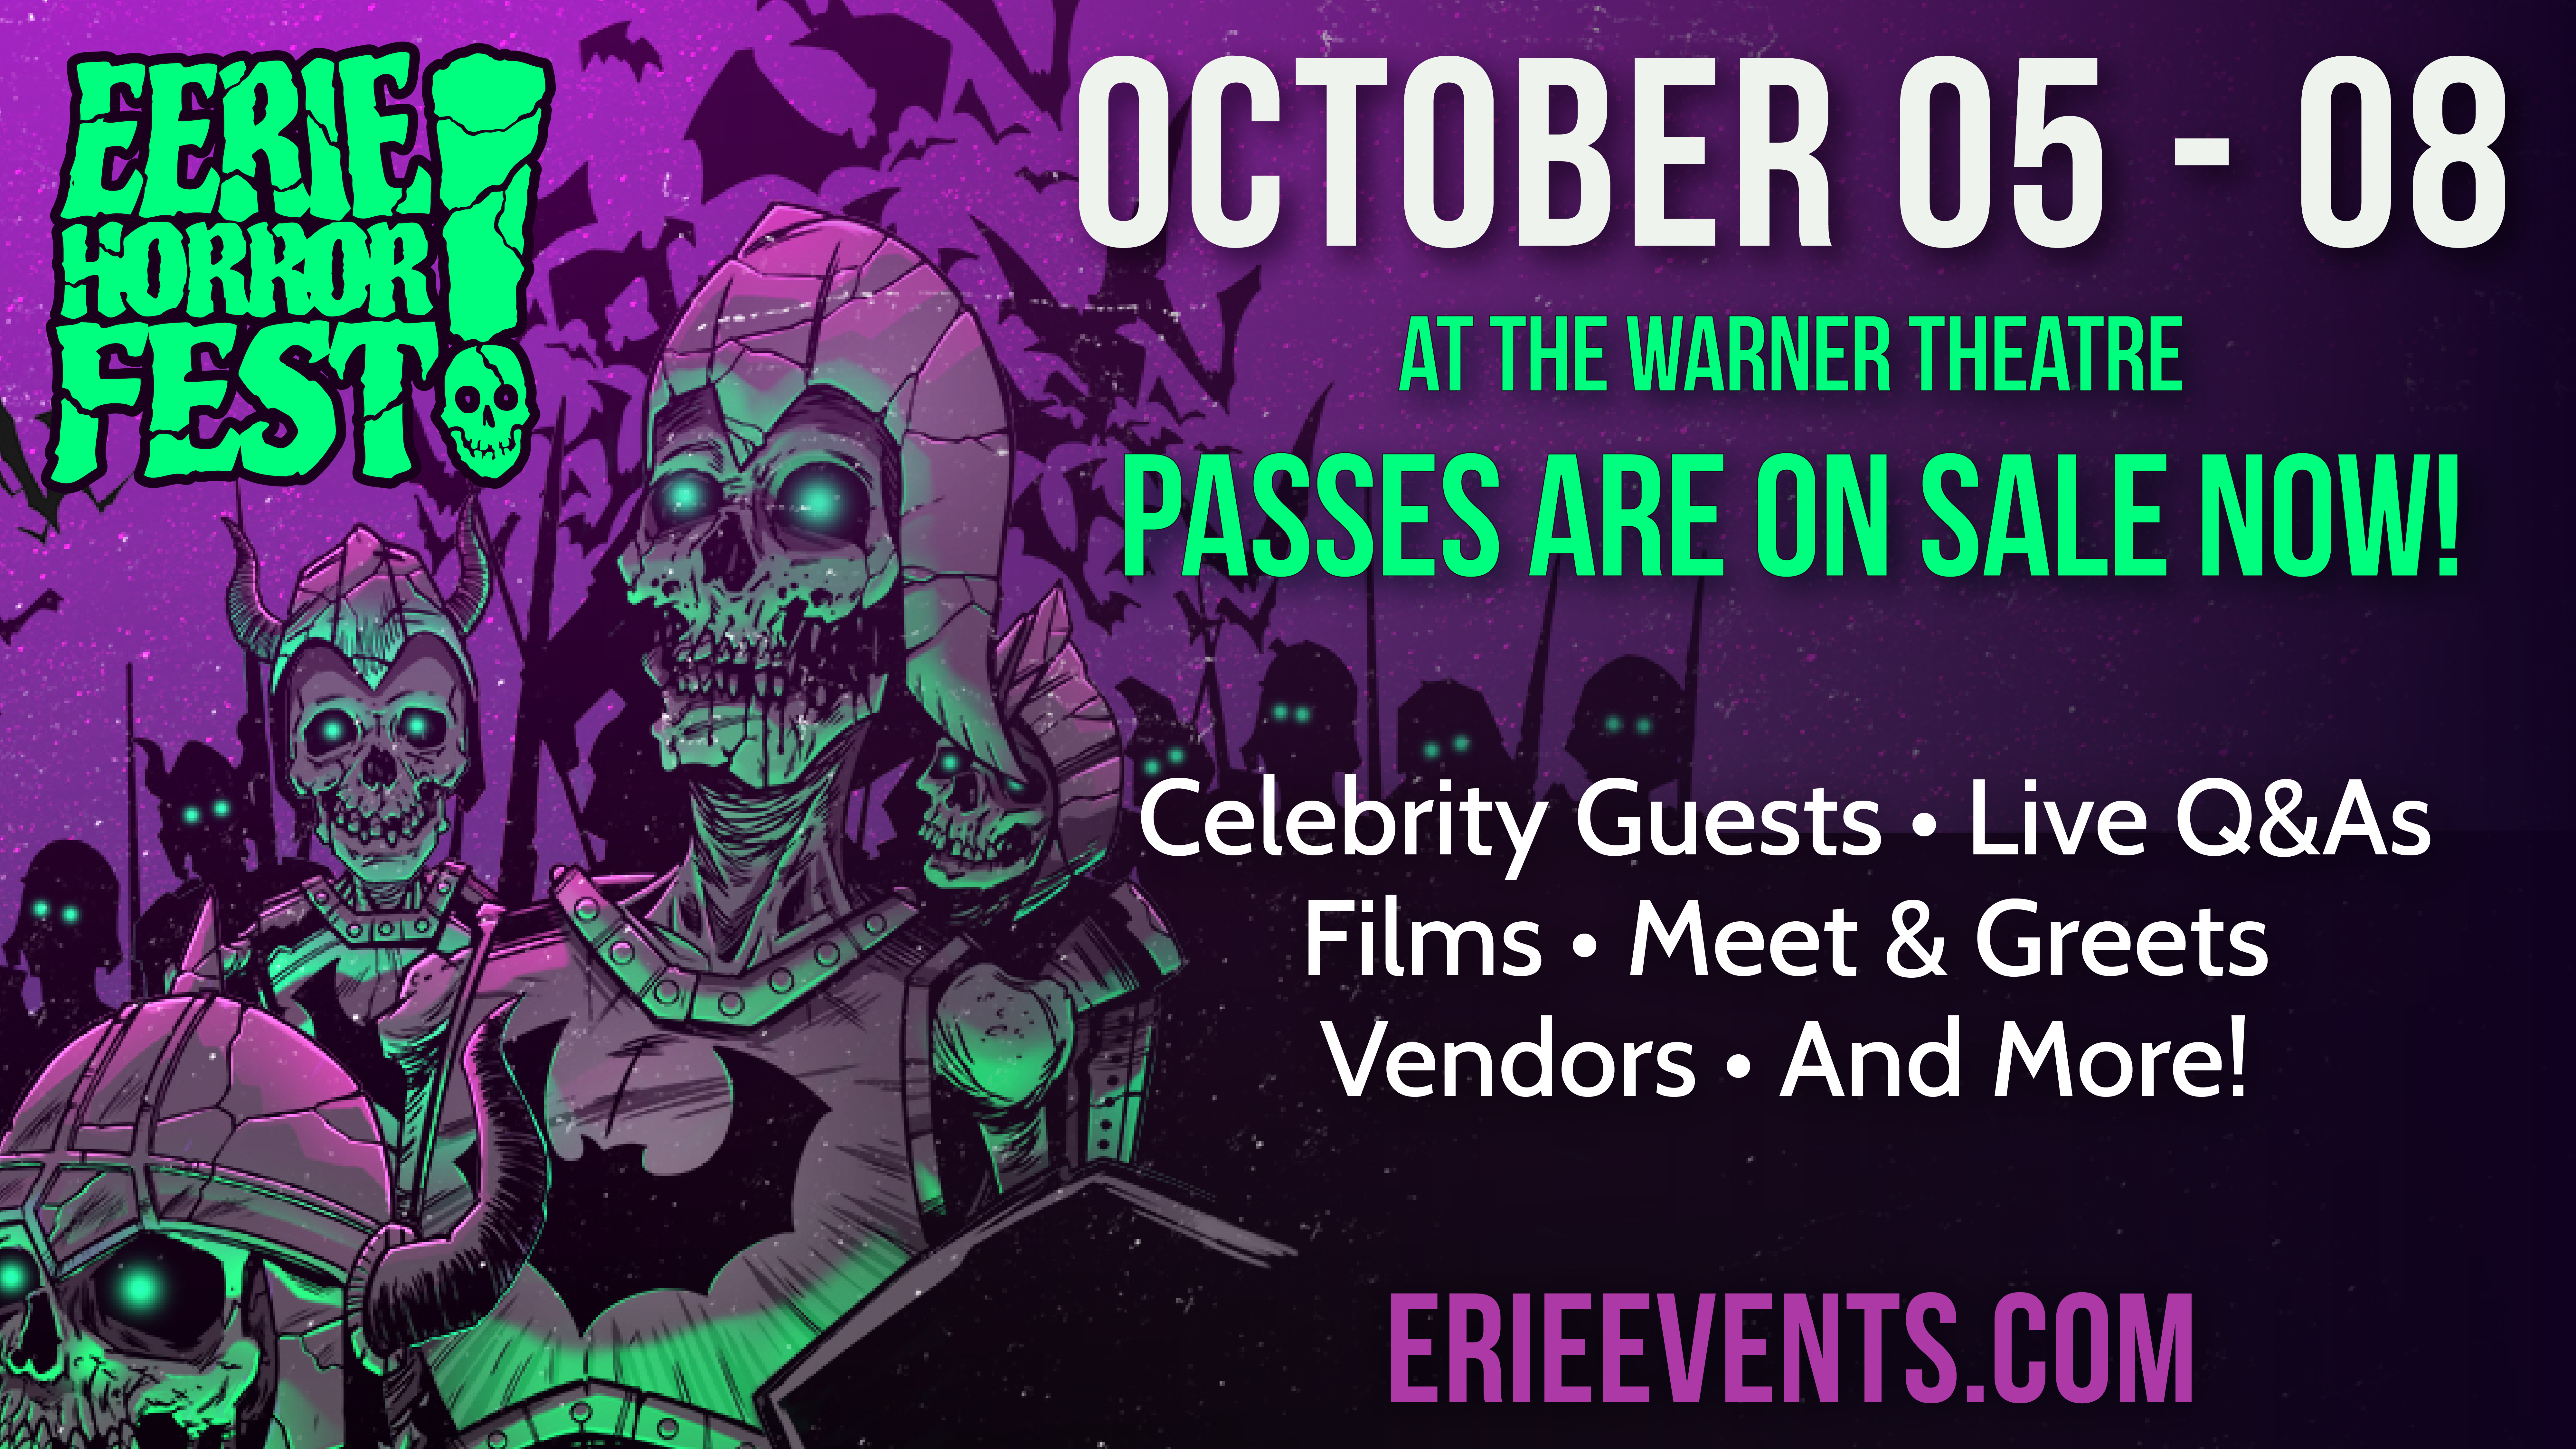 Eerie Horror Fest 2022 - Passes are on sale now!